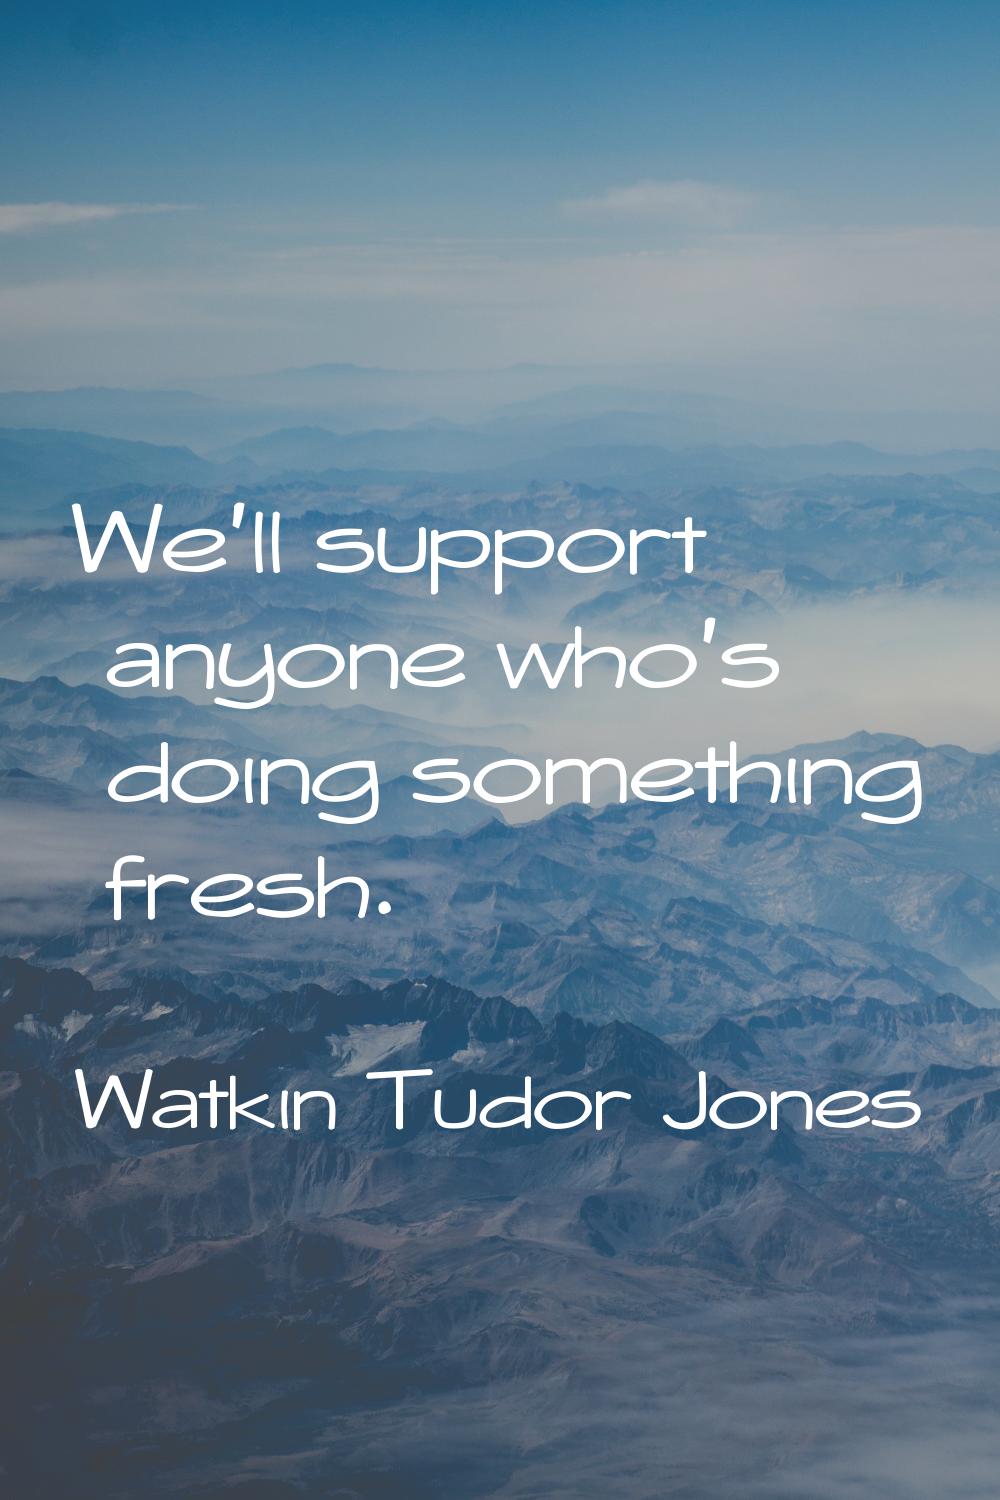 We'll support anyone who's doing something fresh.